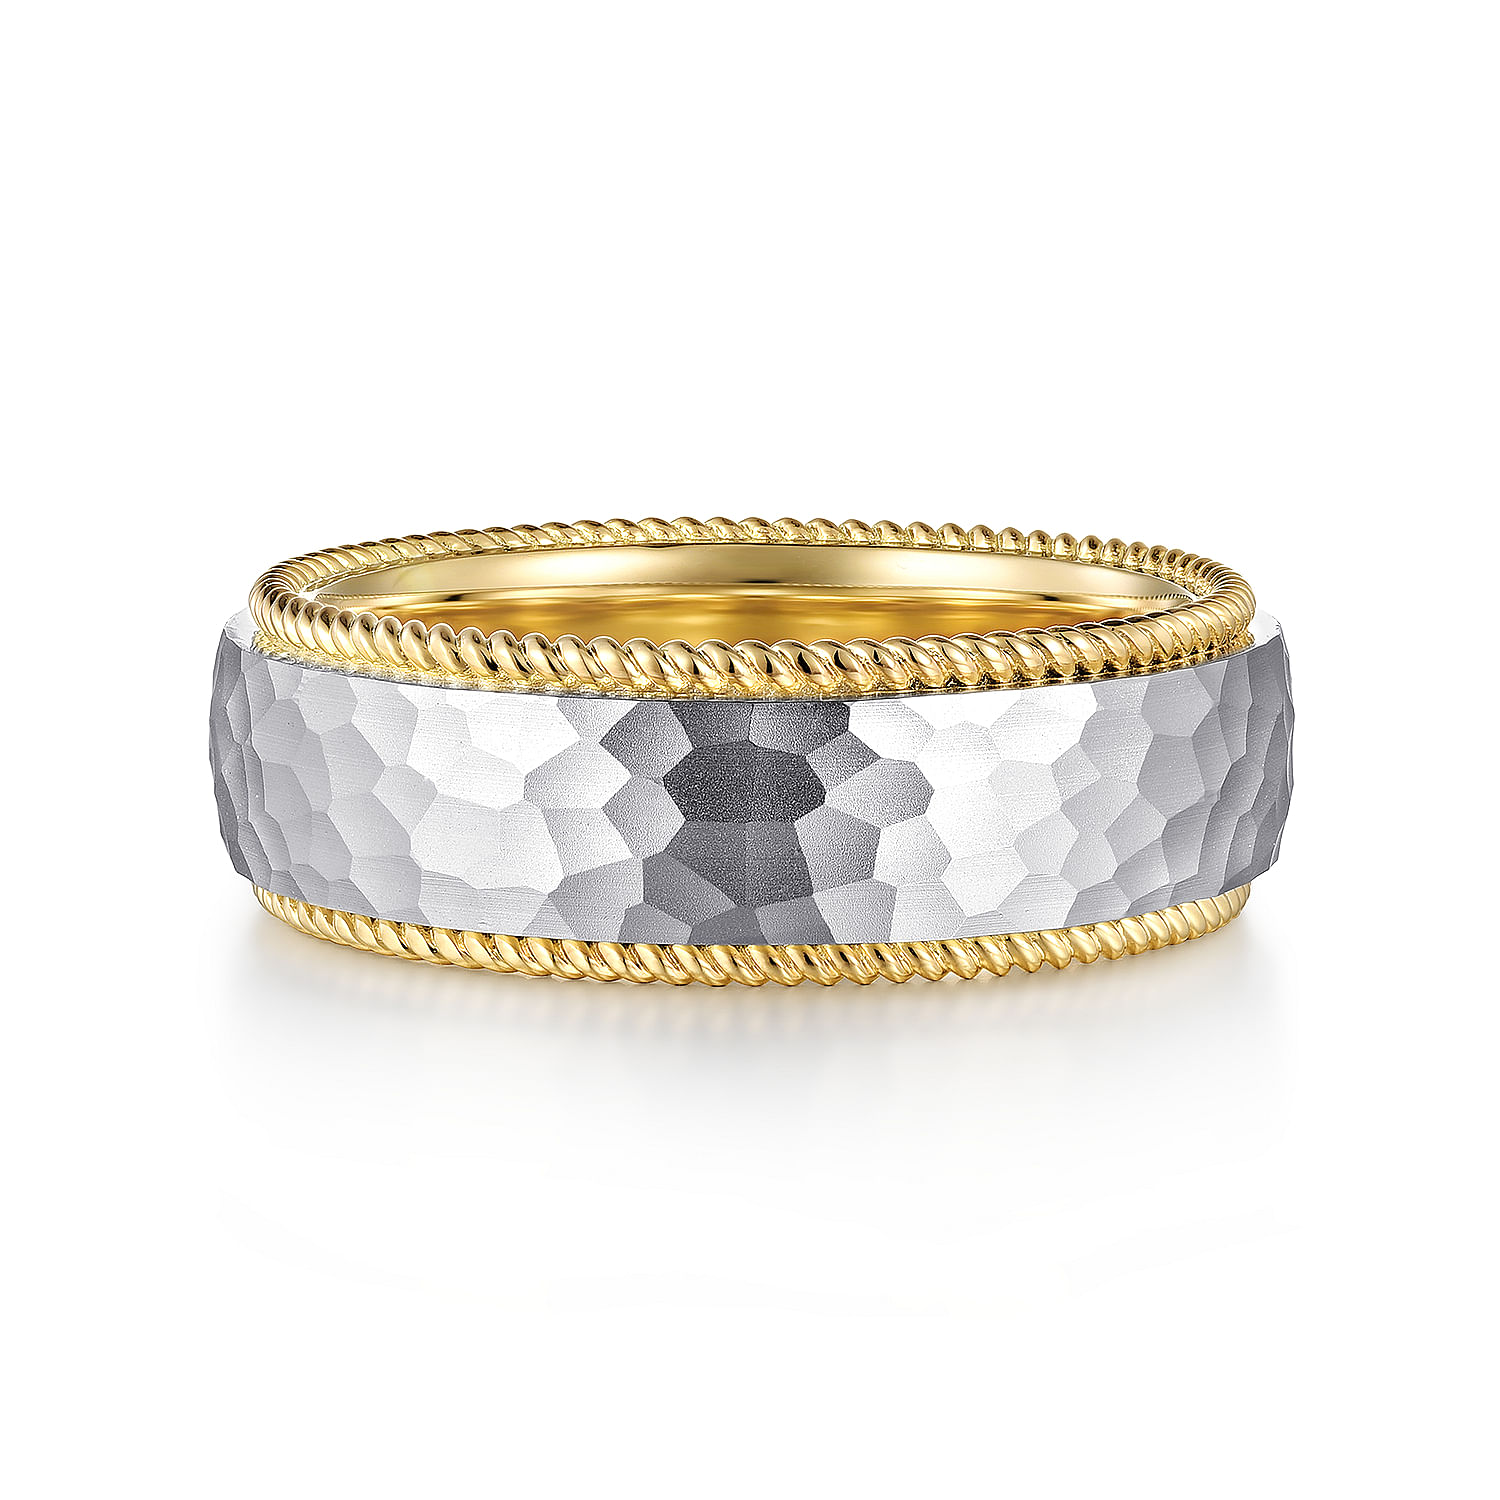 Atticus - 14k Yellow & white Gold 8mm Wide Band Signature Mens